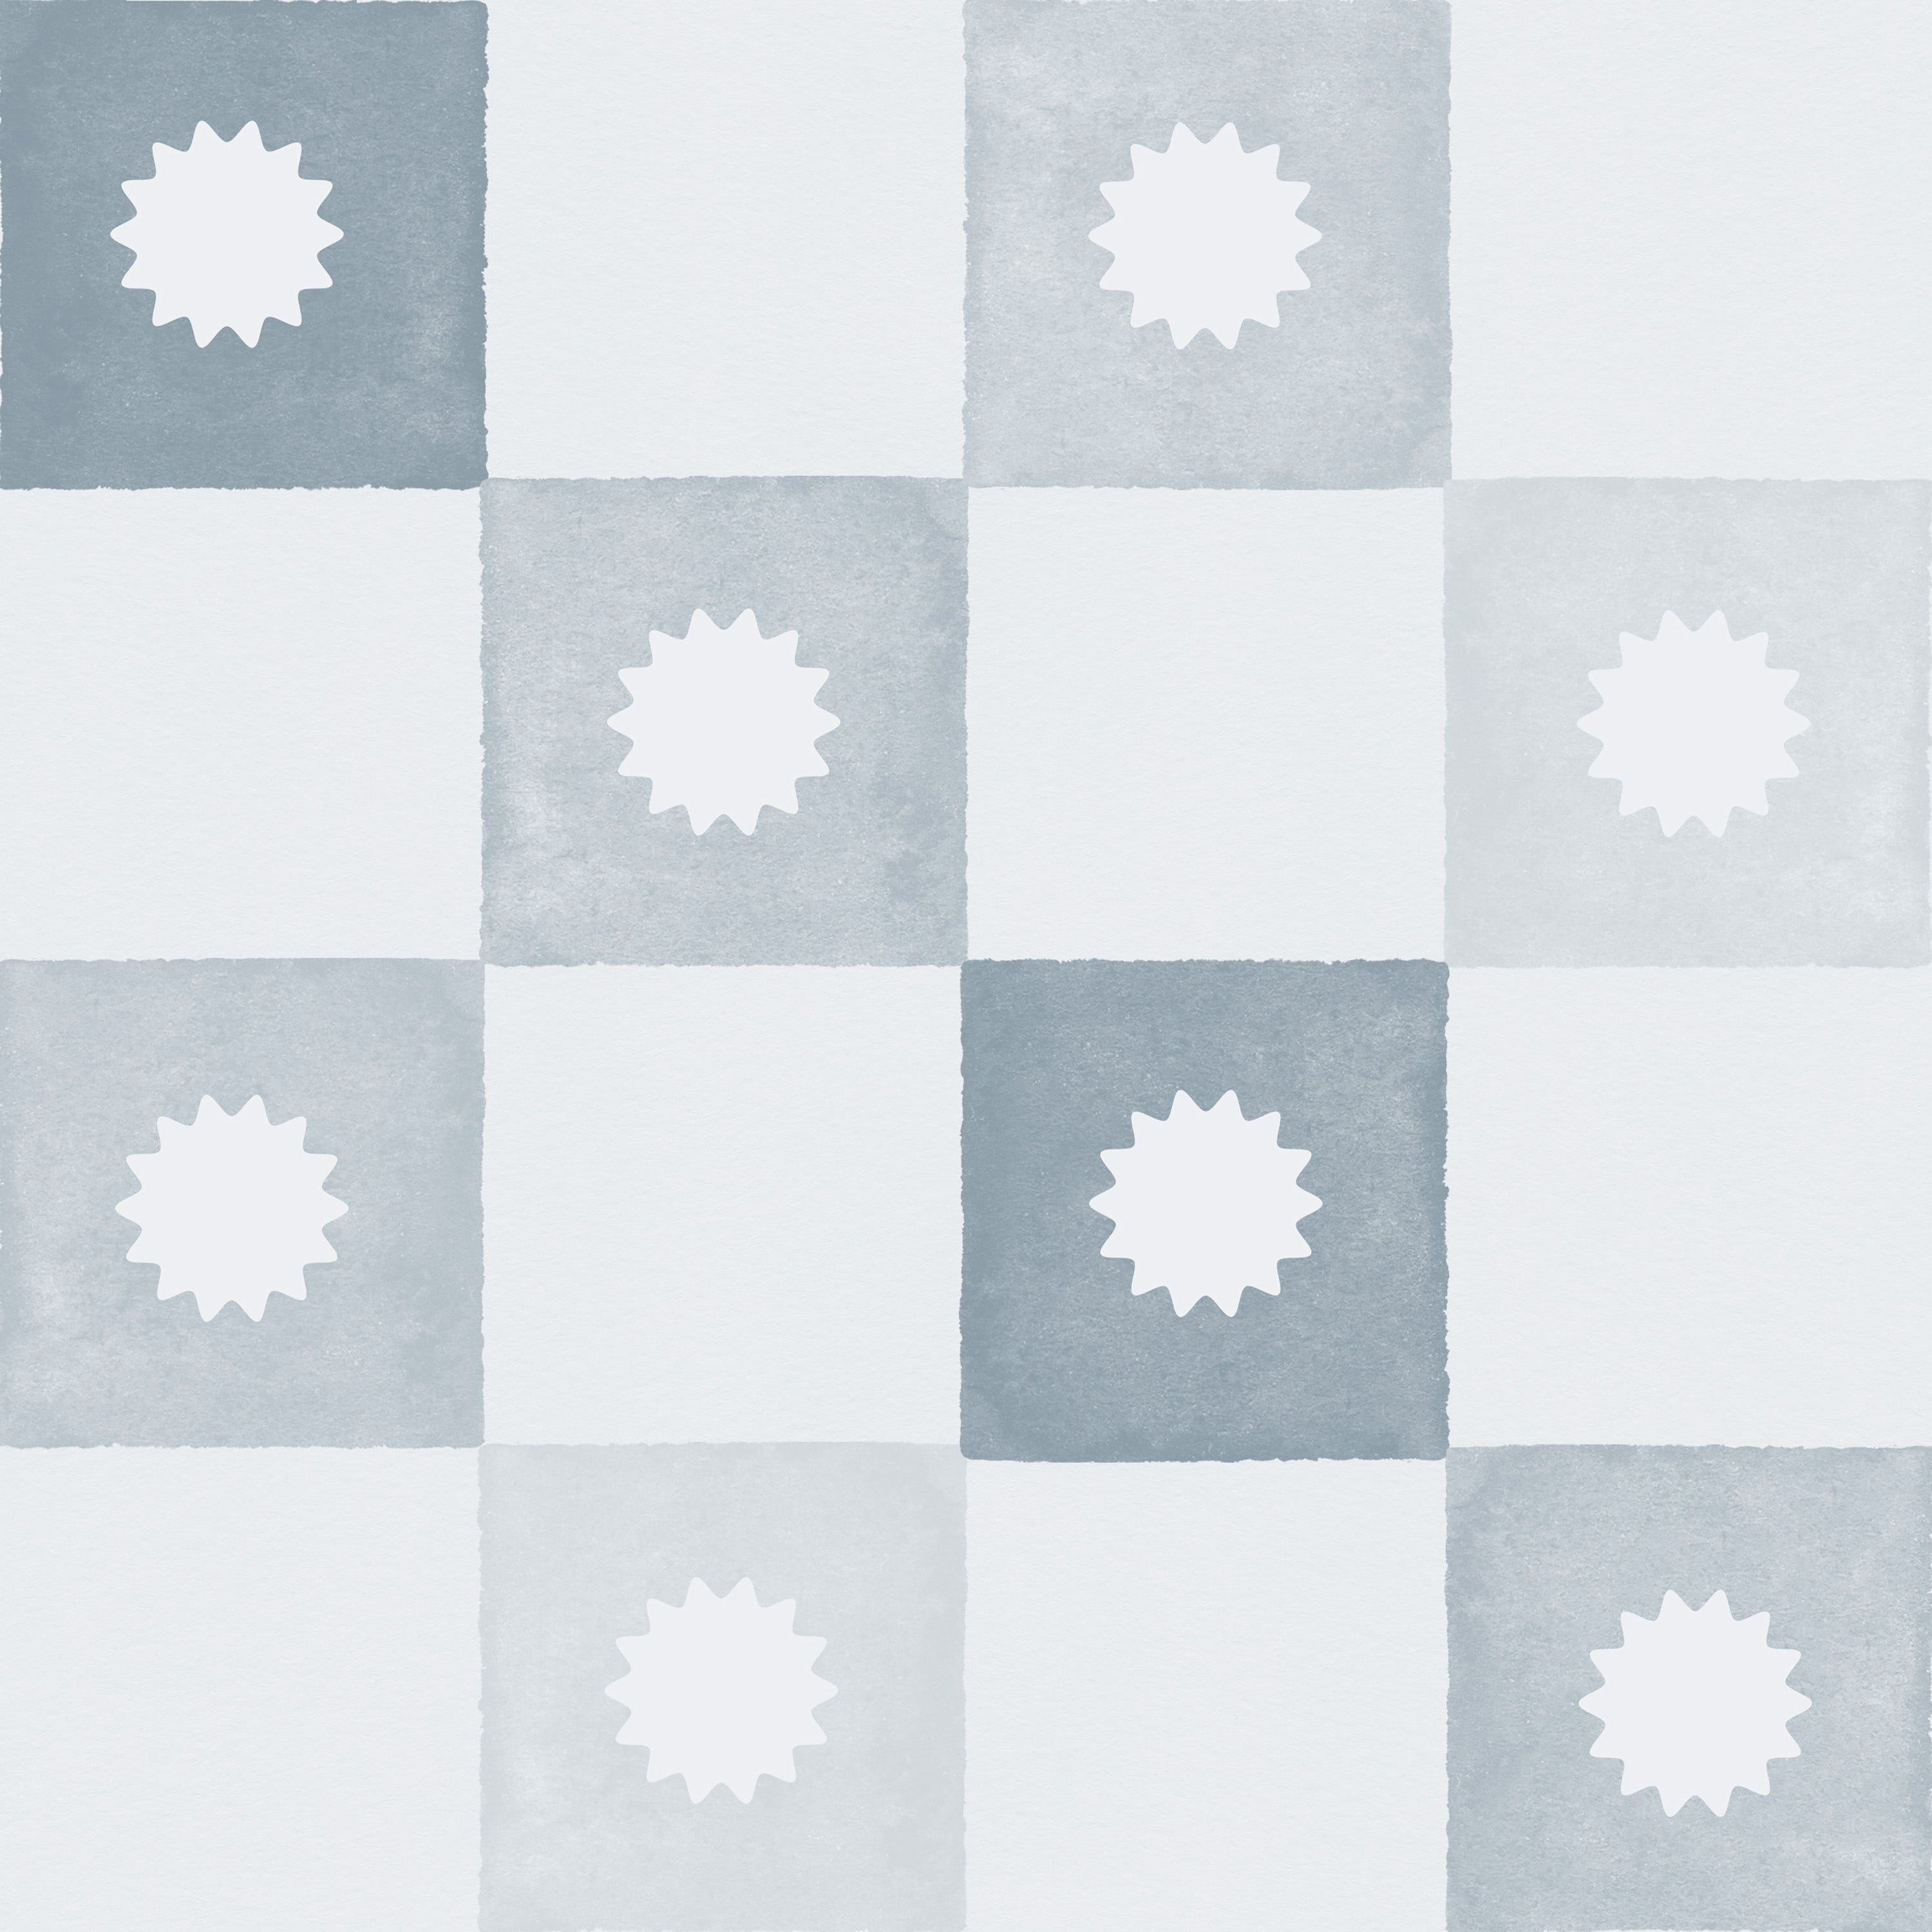 Close-up of the Coralie Wallpaper in pale blue displaying a watercolor-style checkered pattern. Each square alternates between white and pale blue, with a pale blue sunburst motif centered in each square